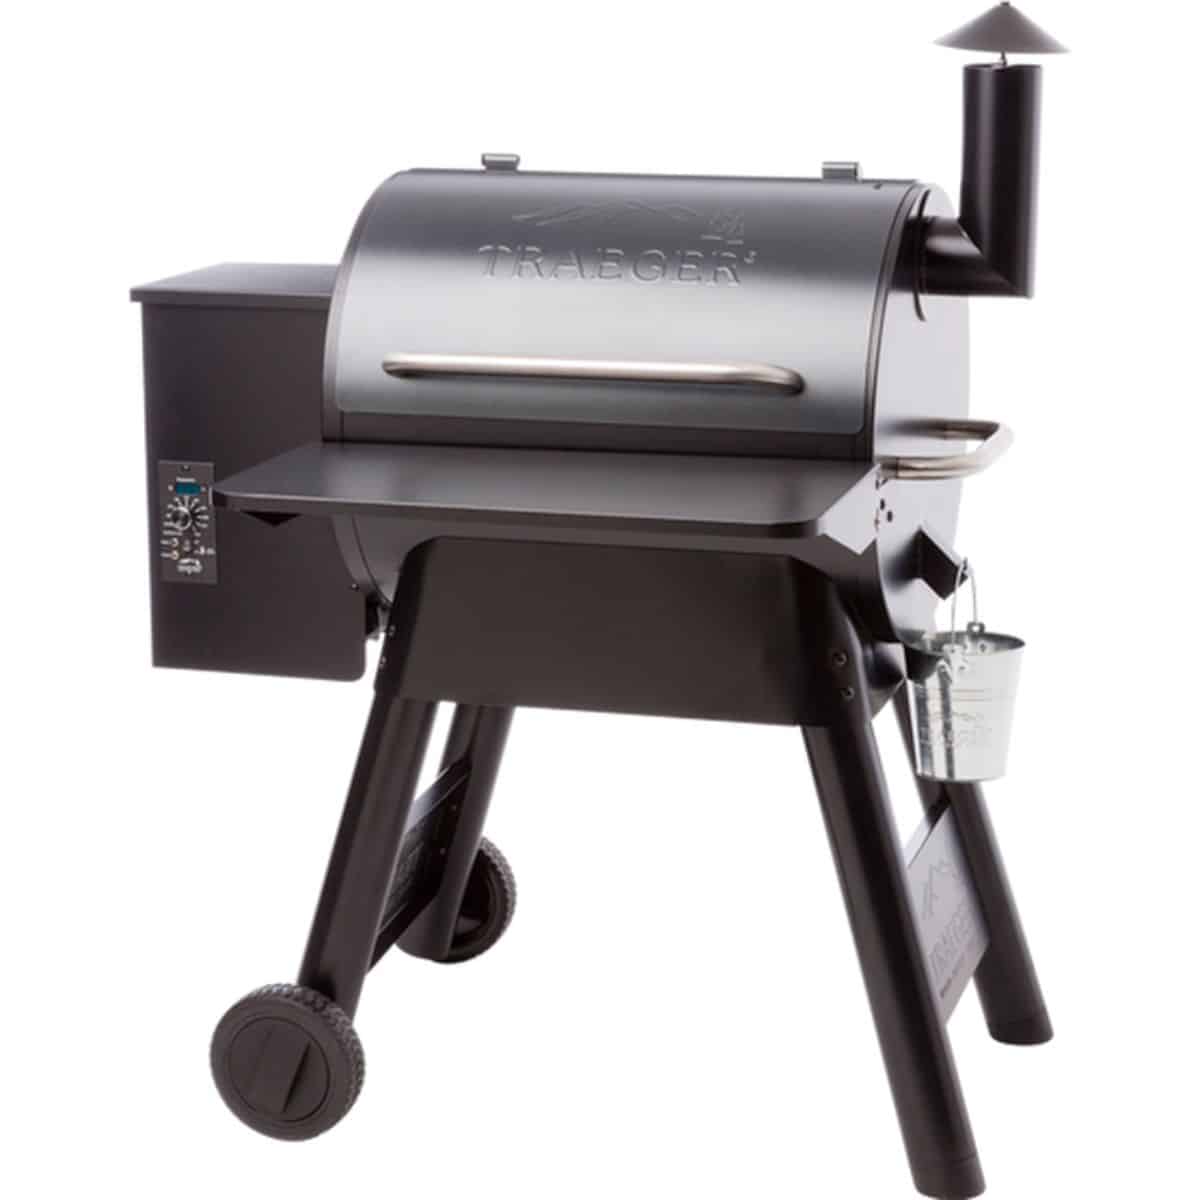 A traeger grill with an attached front shelf on a white background.